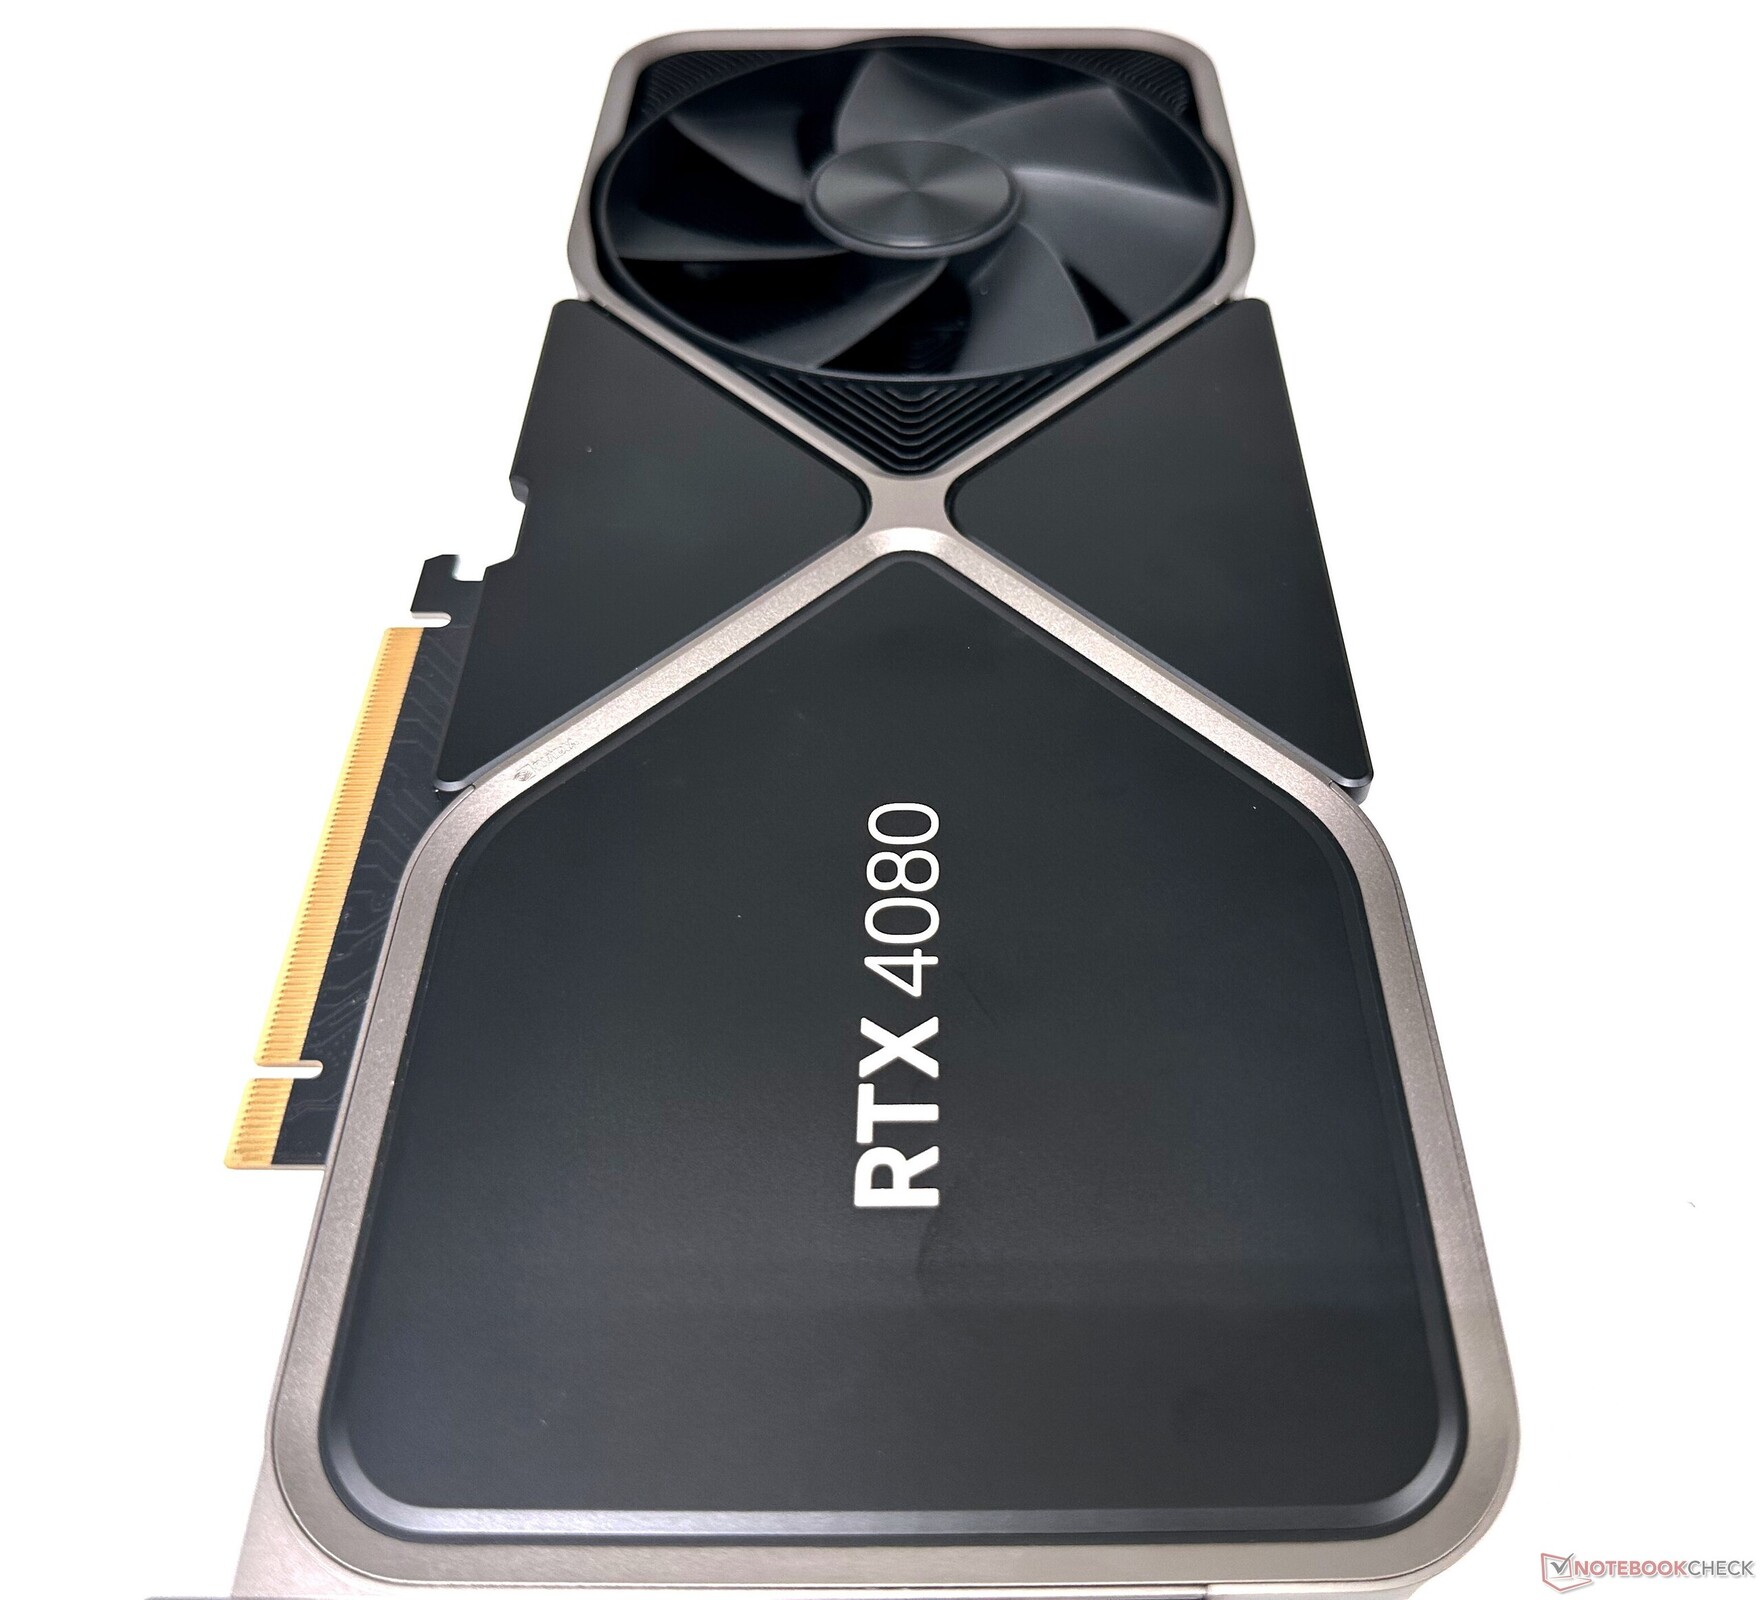 Nvidia GeForce RTX 4080 price cut may be on the cards for GPU